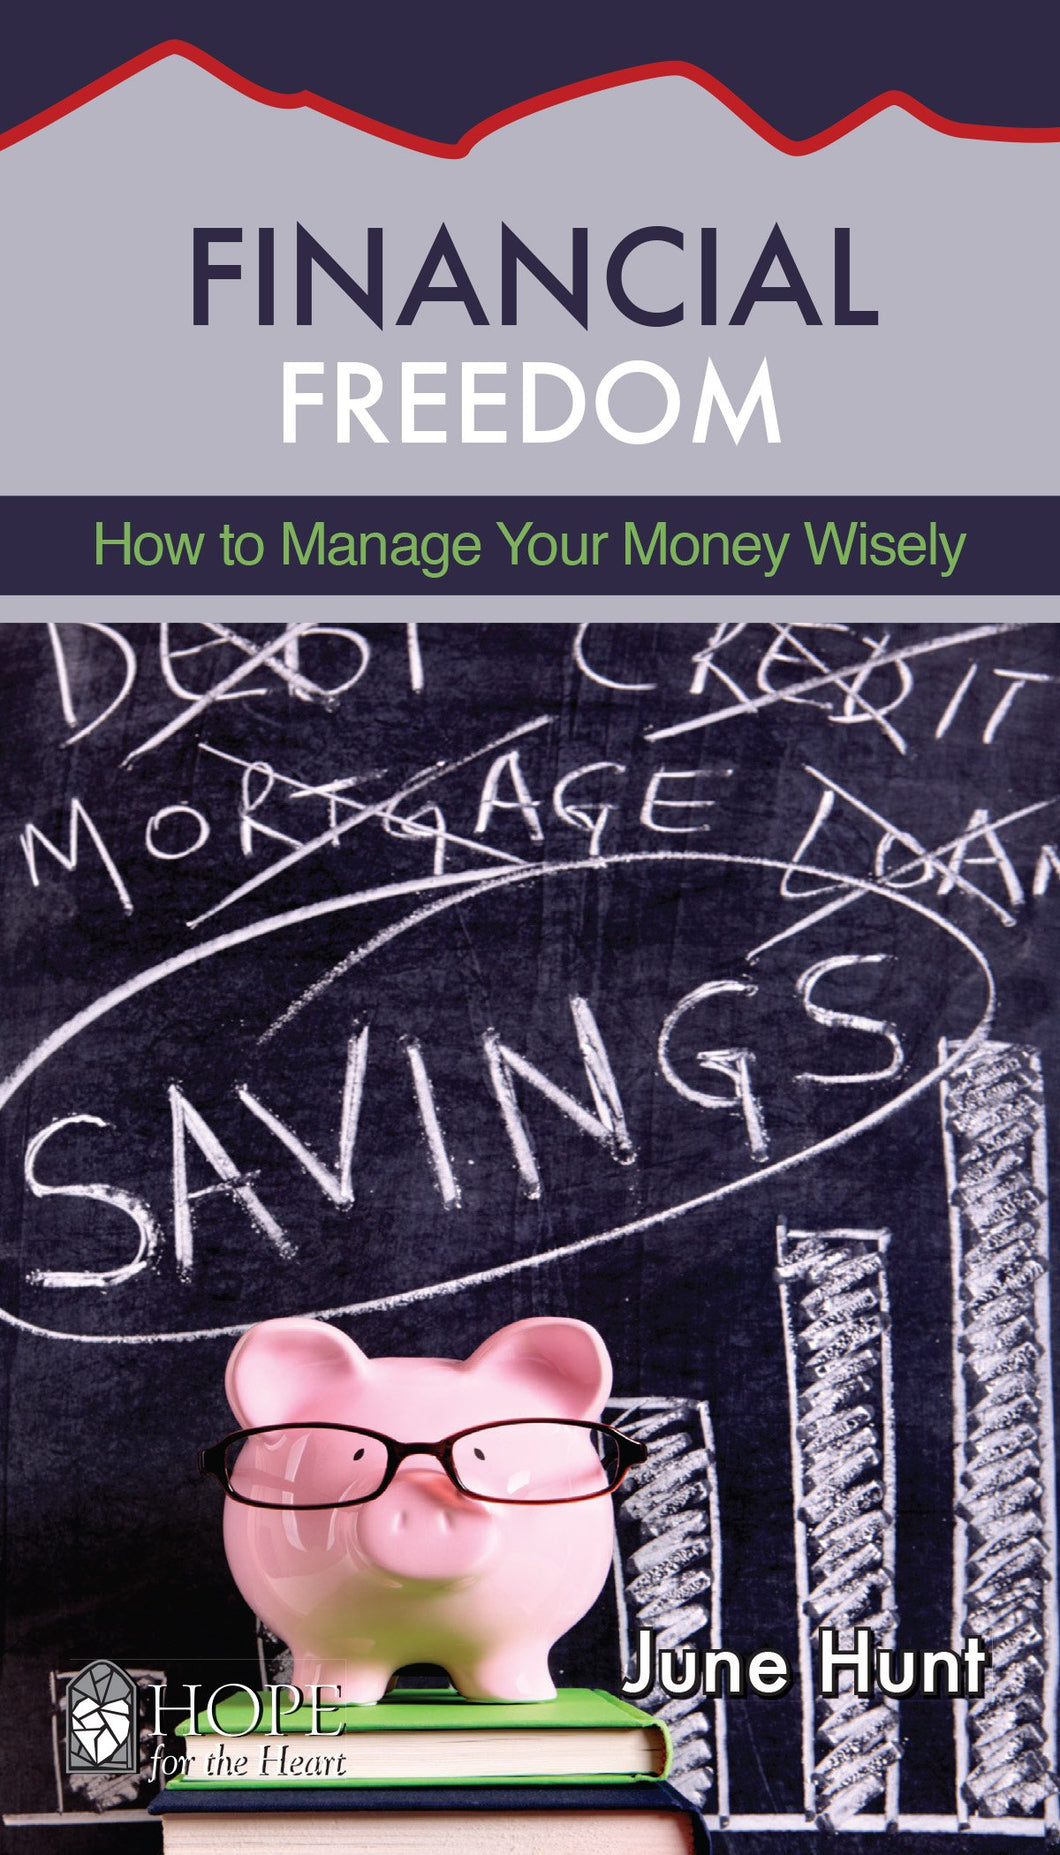 Financial Freedom - How to Manage Your Money Wisely by June Hunt